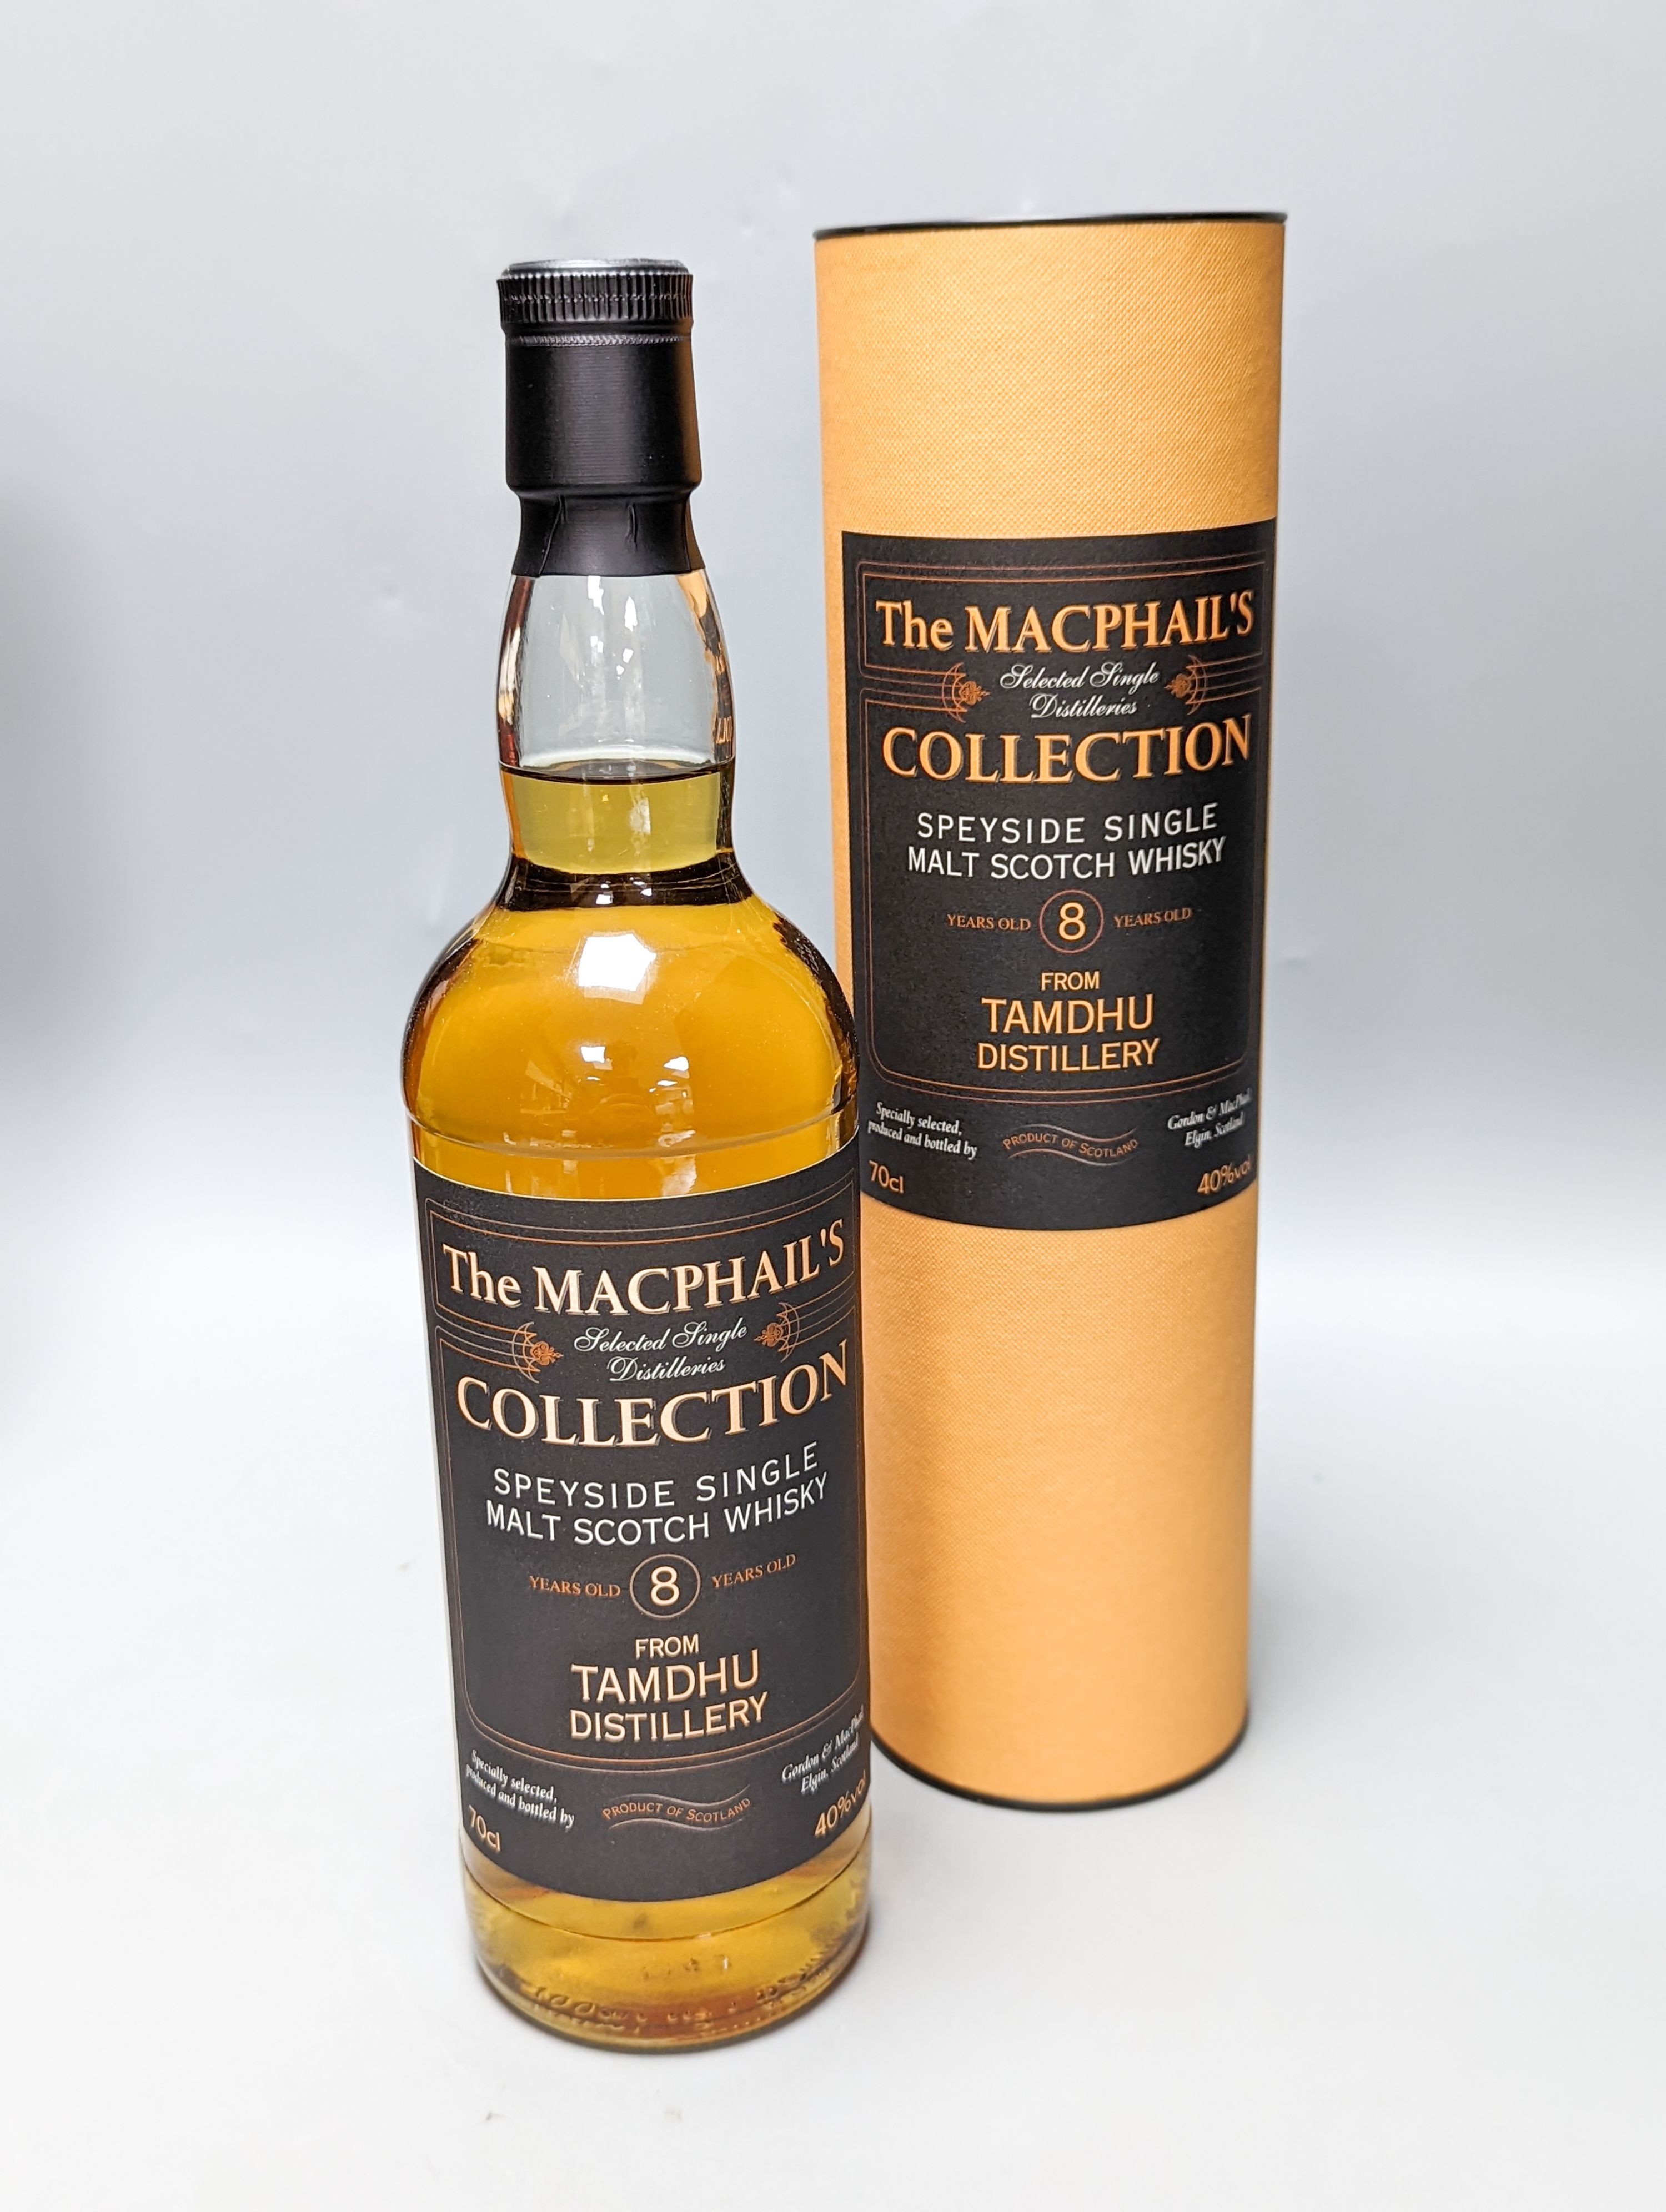 Six assorted single malt whiskies including The Macphails Collection 8 year old, The Glenlivet aged 15 years, Lismore 12 years old, Ben Nevis aged 10 years, Singleton 12 years and Caol Isla aged 12 years, all but one box